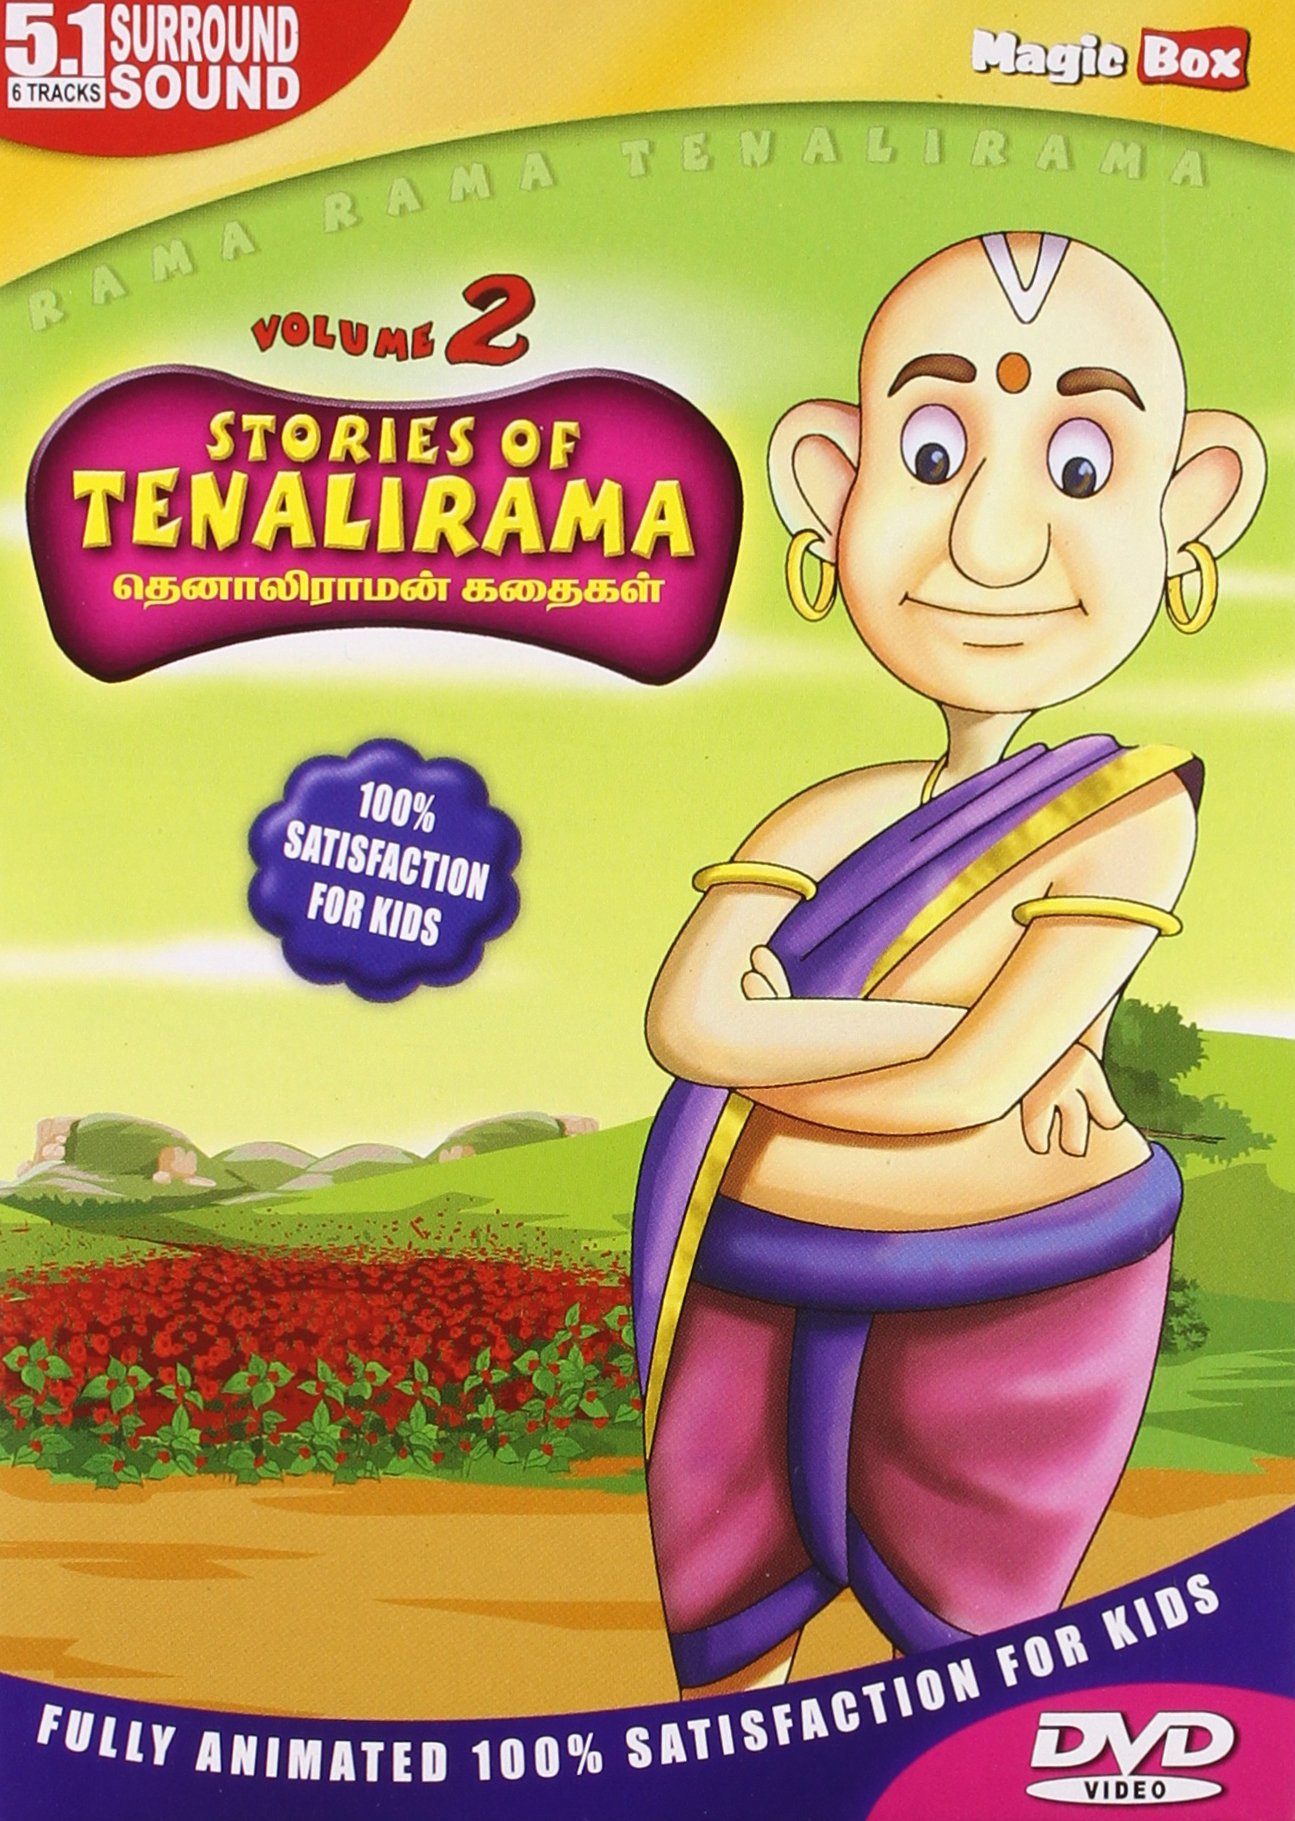 stories-of-tenalirama-vol-2-movie-purchase-or-watch-online